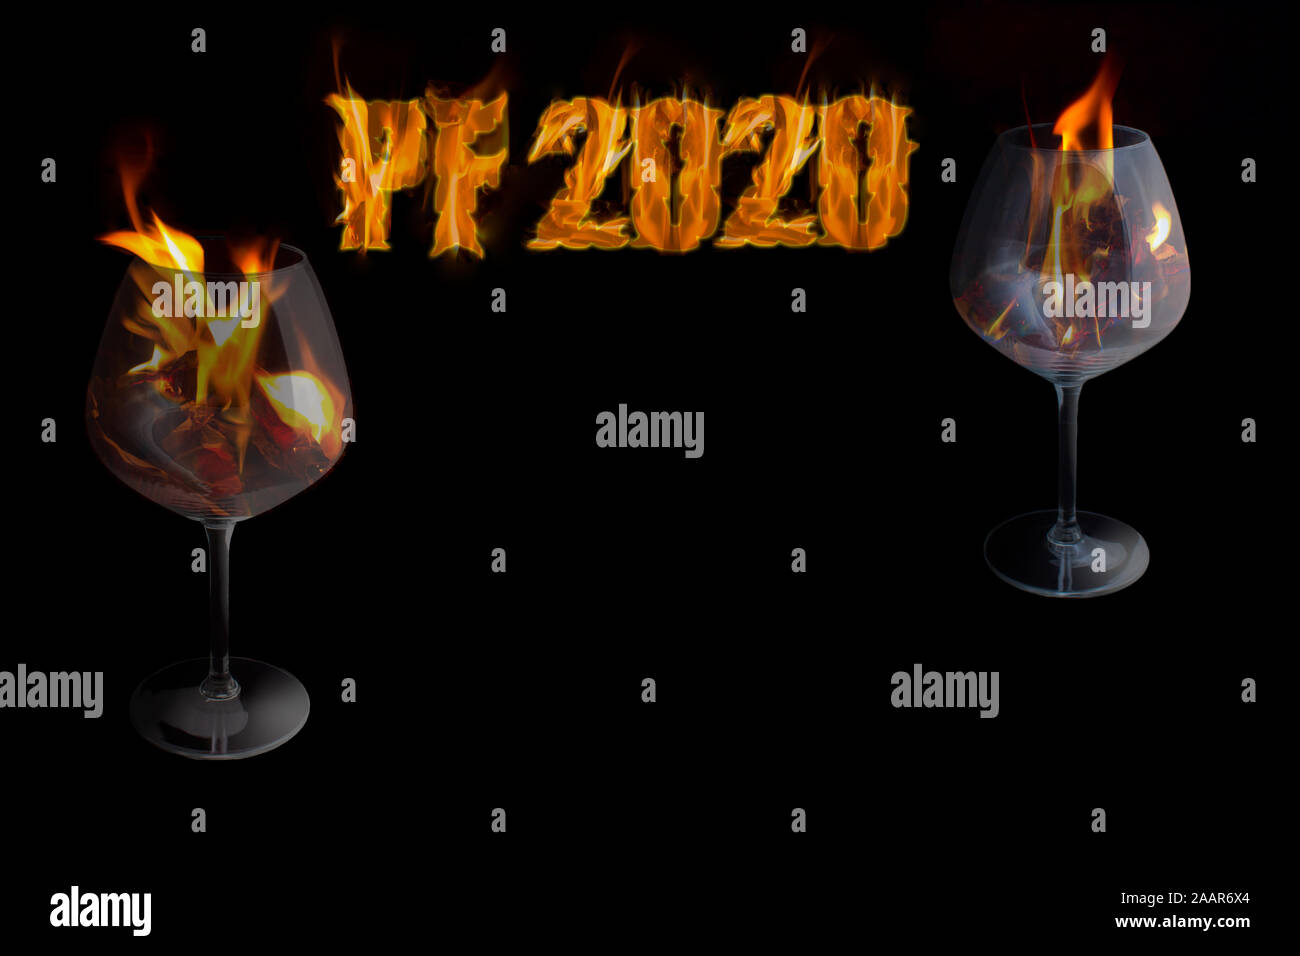 PF 2020 - happy New Year with a glasses in a fire on black background with free space for text. Stock Photo